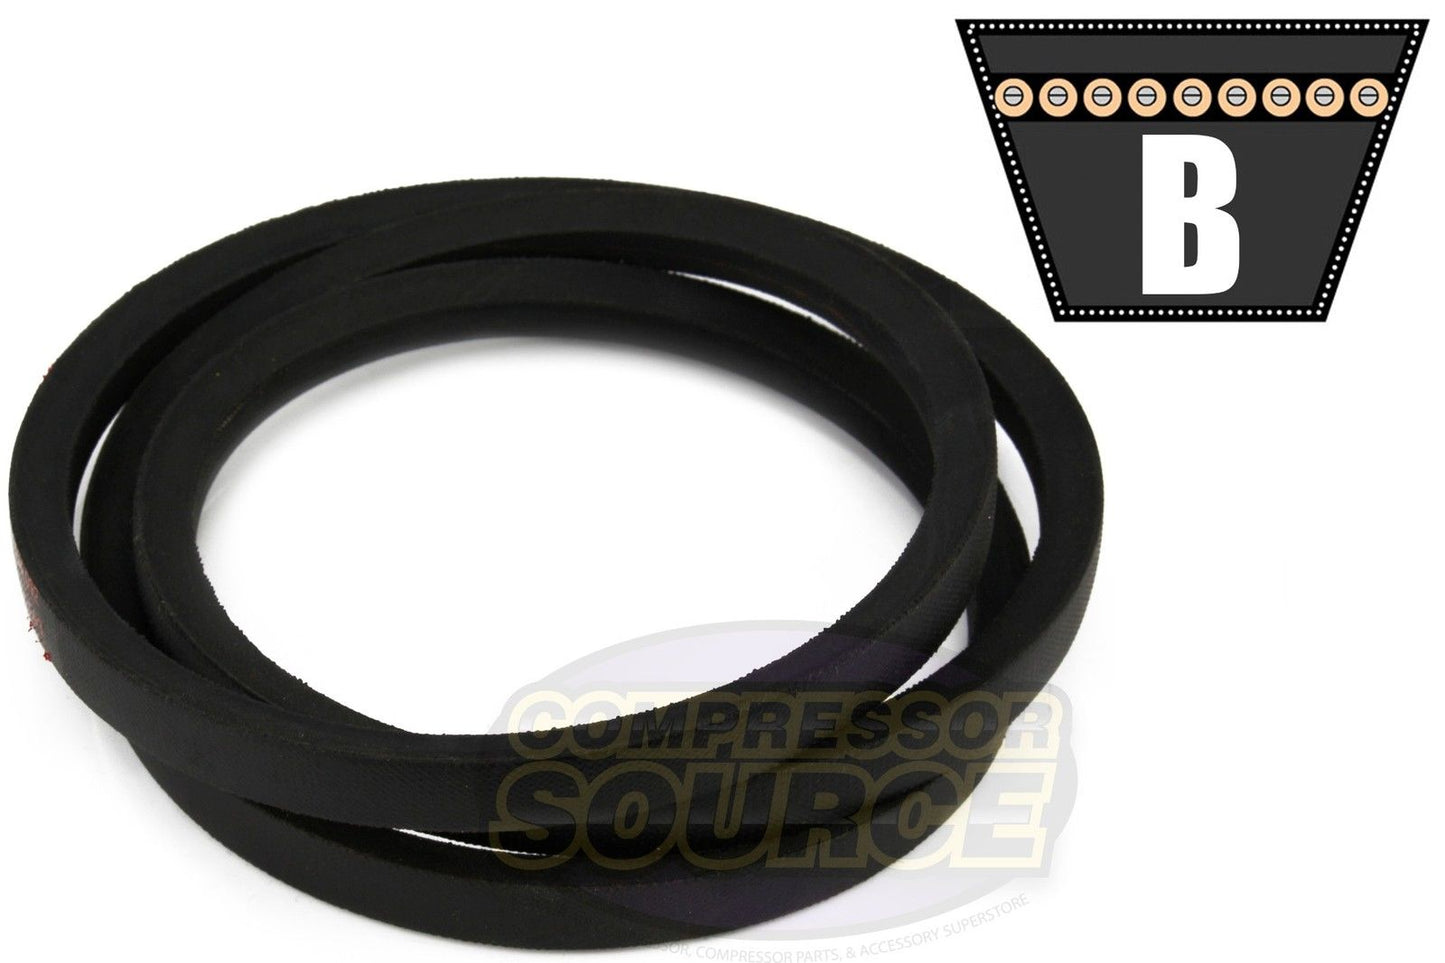 B45 Replacement High Quality Industrial & Lawn Mower 5/8" x 48" V Belt 5L480